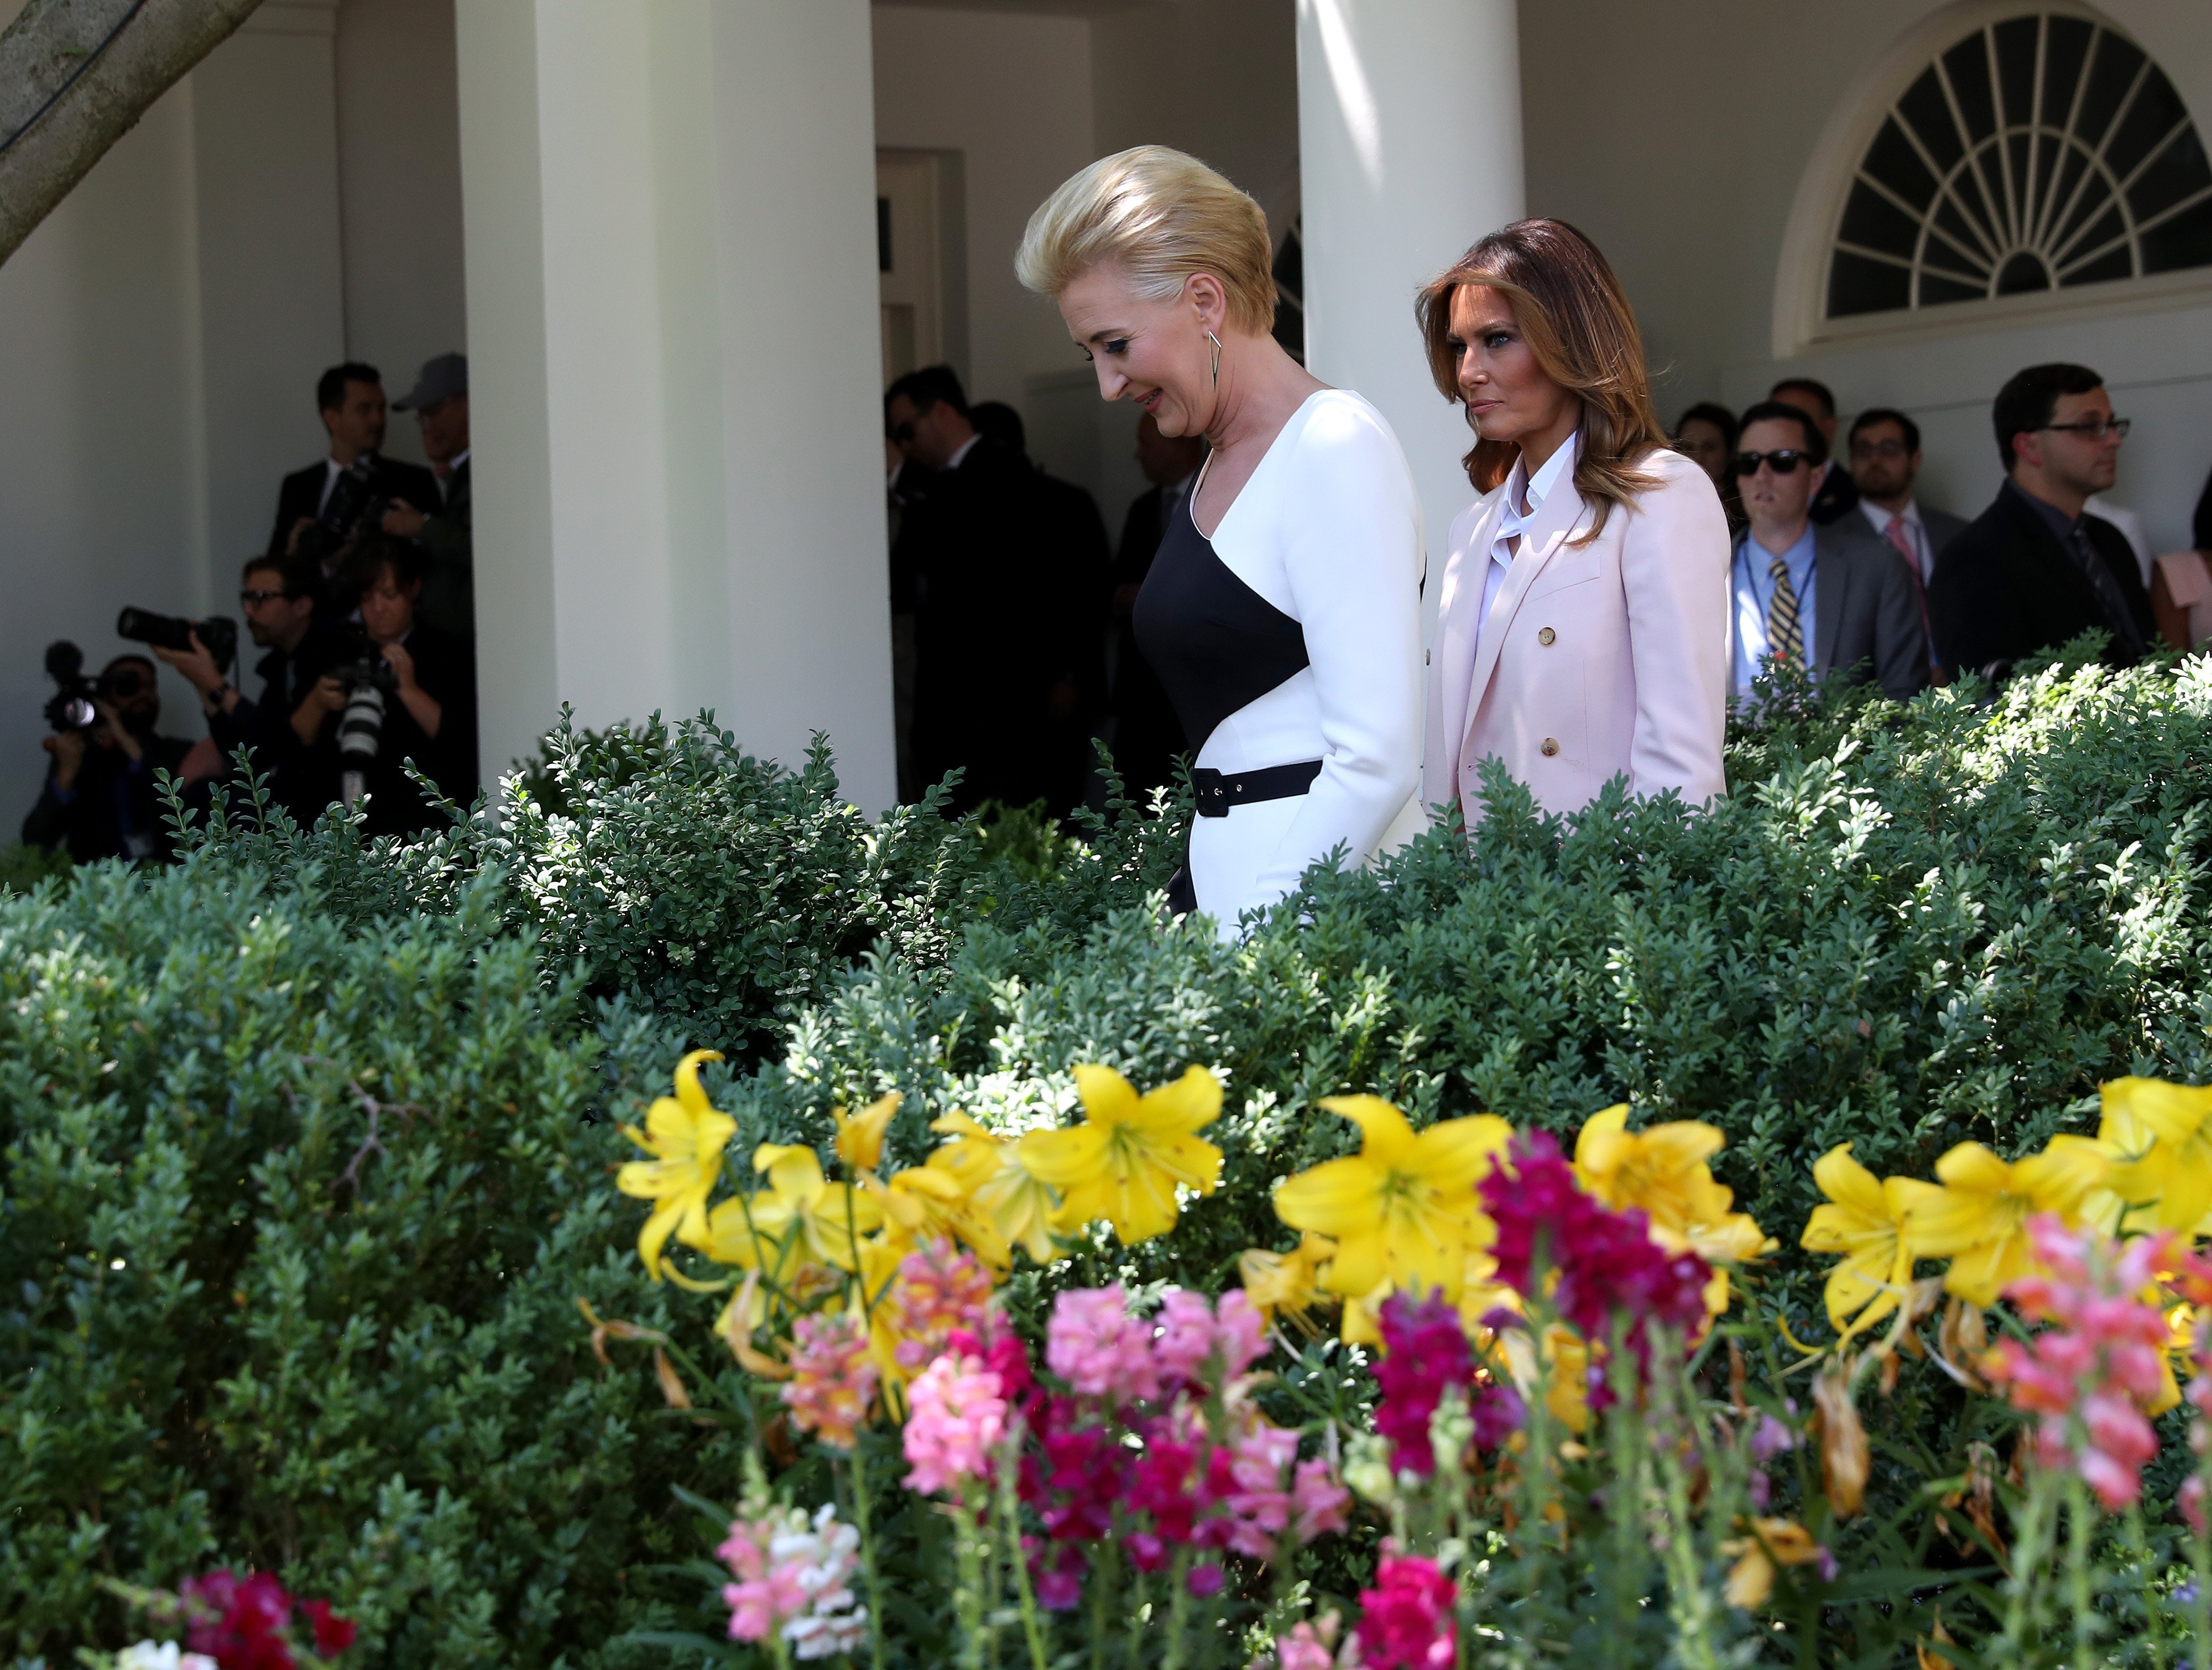 First Lady of Poland Agata Kornhauser-Duda and U.S. first lady Melania Trump on their way to the Rose Garden for a press conference | Photo: Getty Images